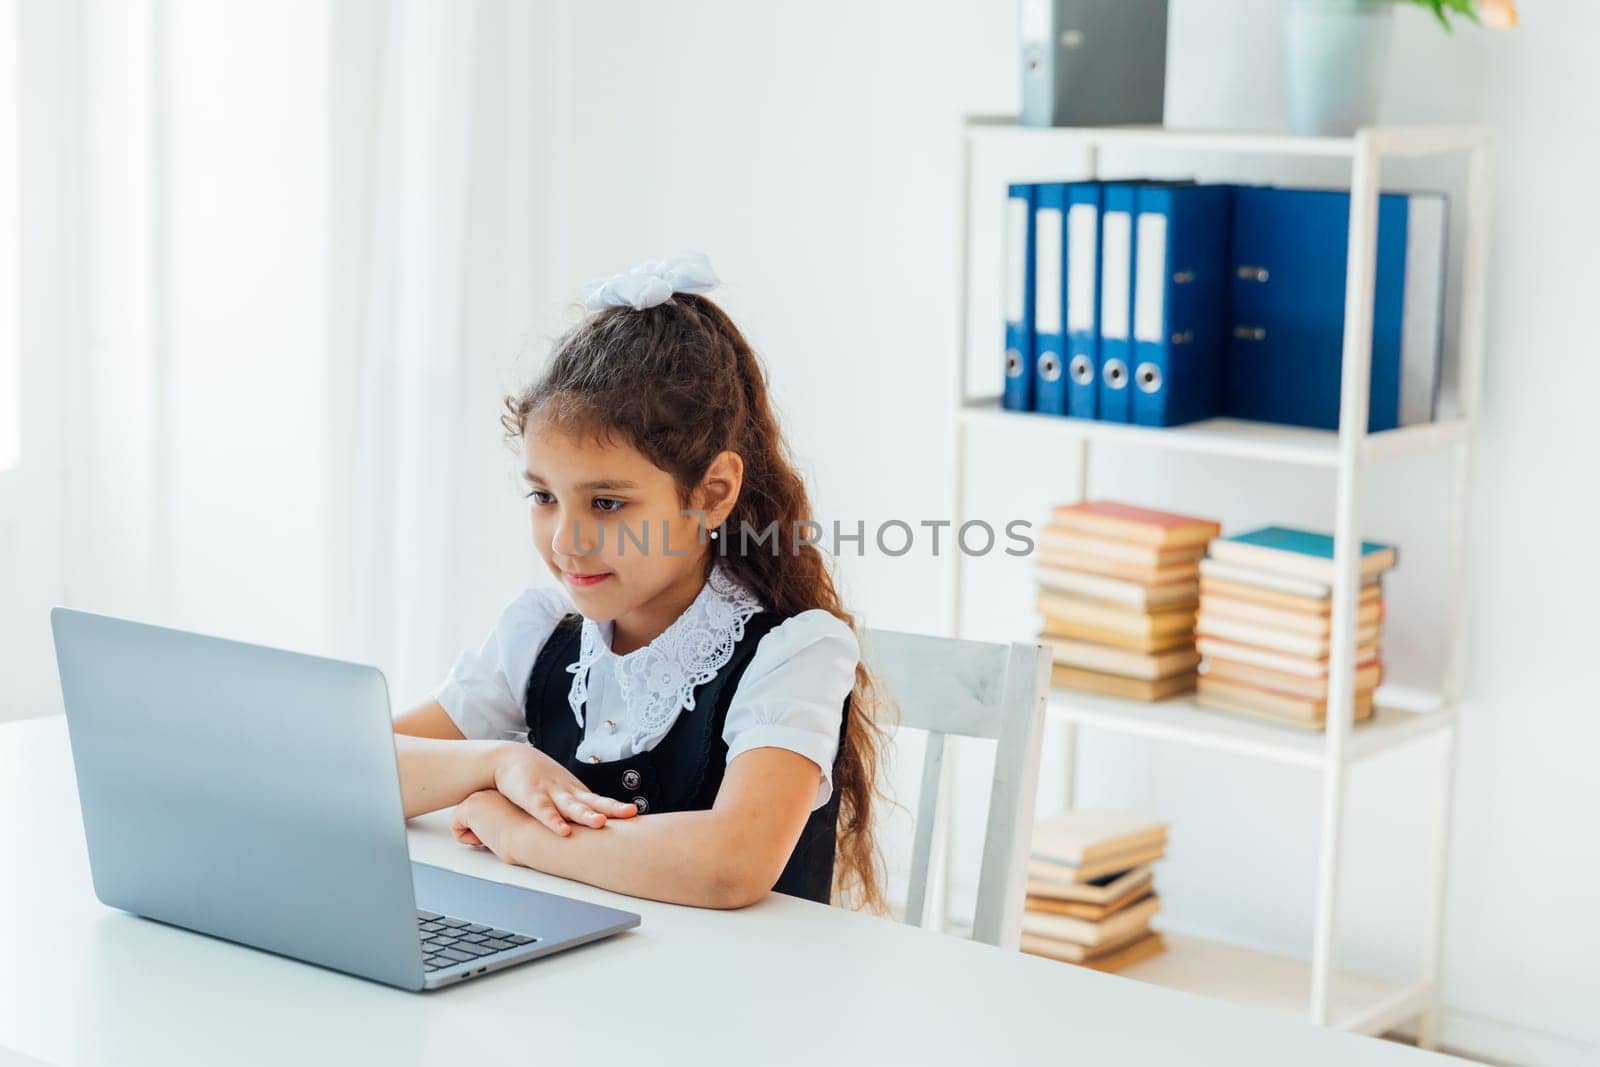 girl sitting at desk with laptop at school